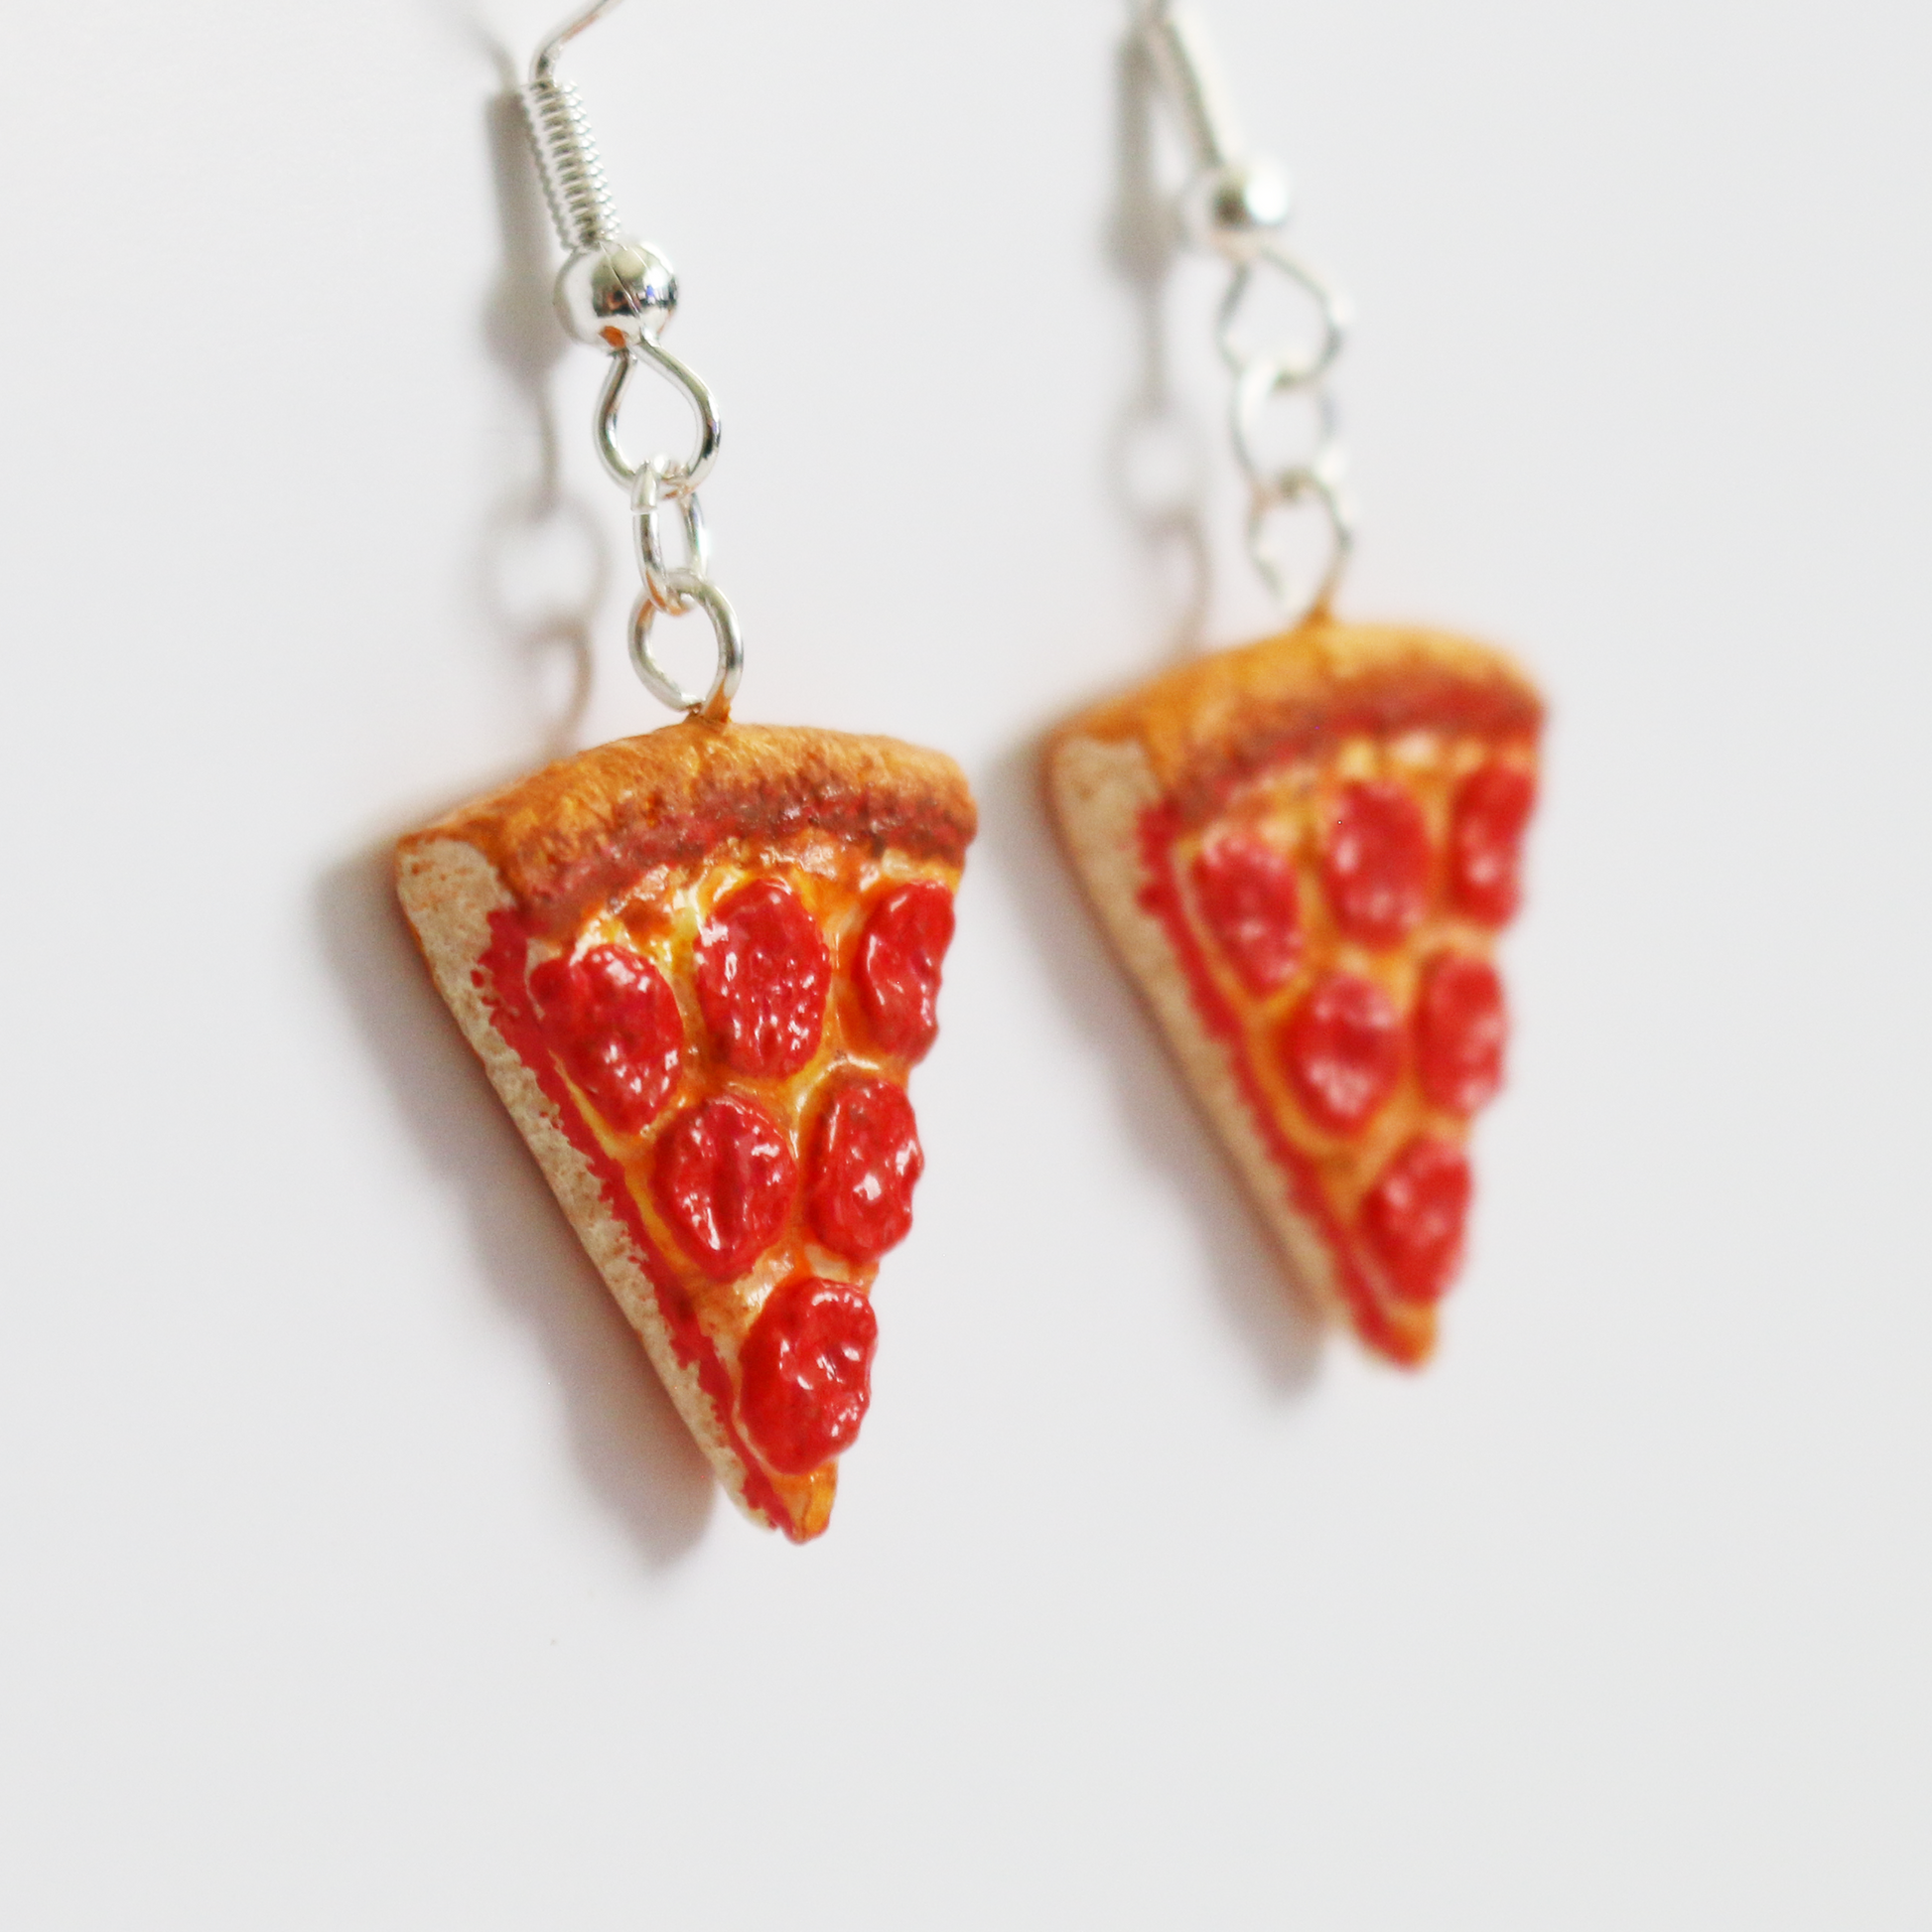 Pepperoni Pizza Slice Earrings | Miniature Realistic Looking | Food Jewelry | S'Berry Boutique